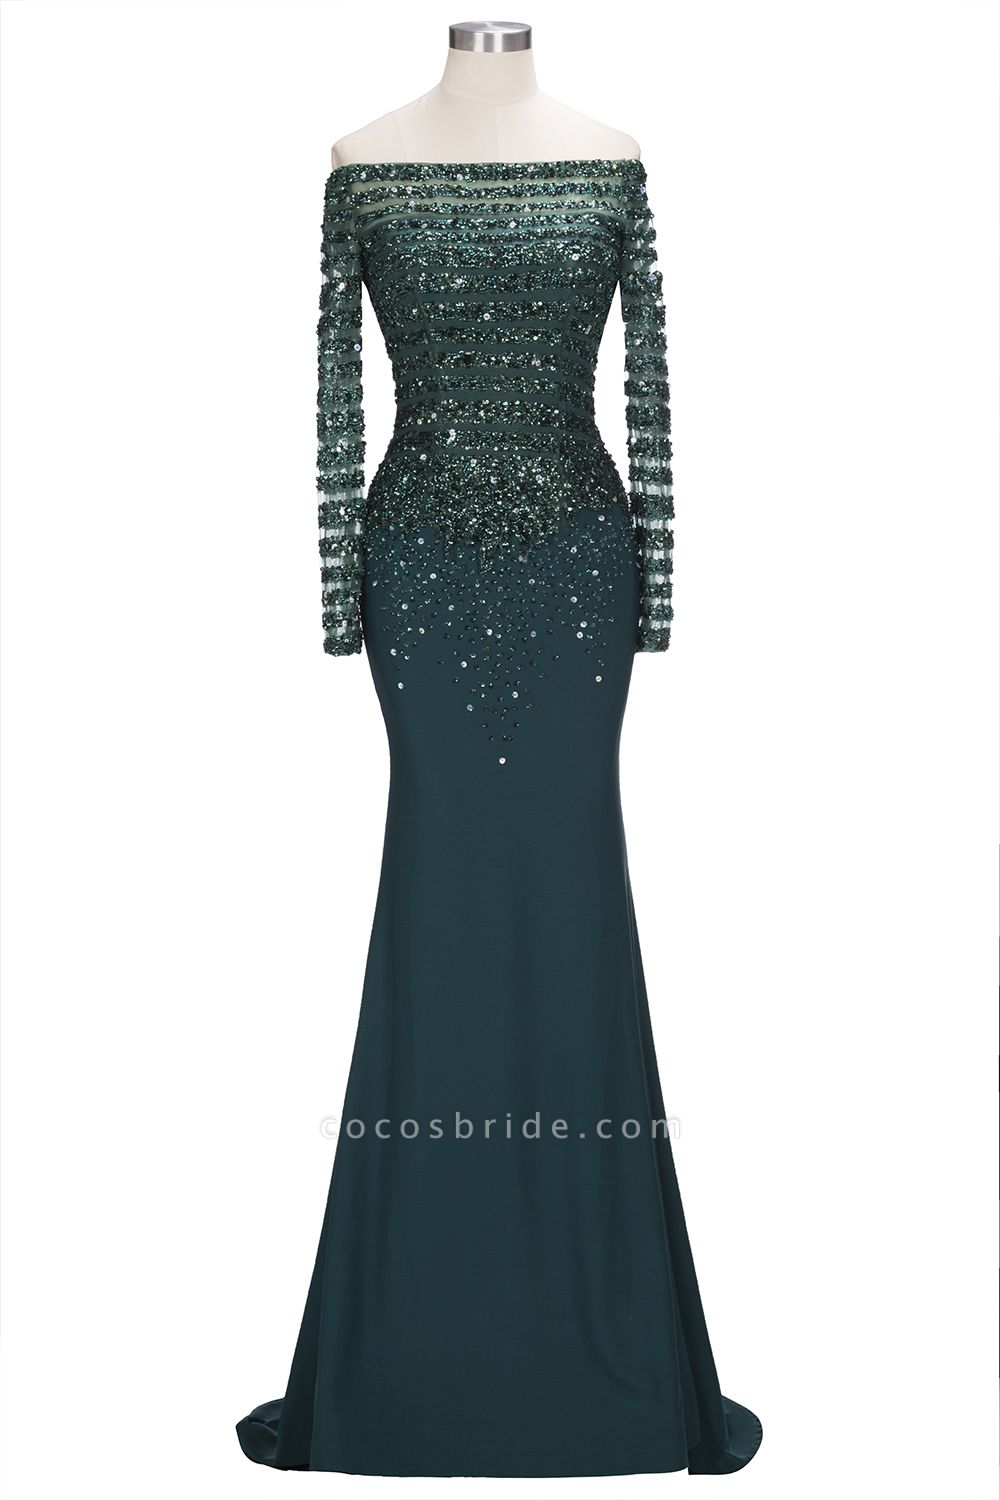 OLYMPIA | Mermaid Long Strapless Long Sleeves Prom Dresses with Sequins and Crystals